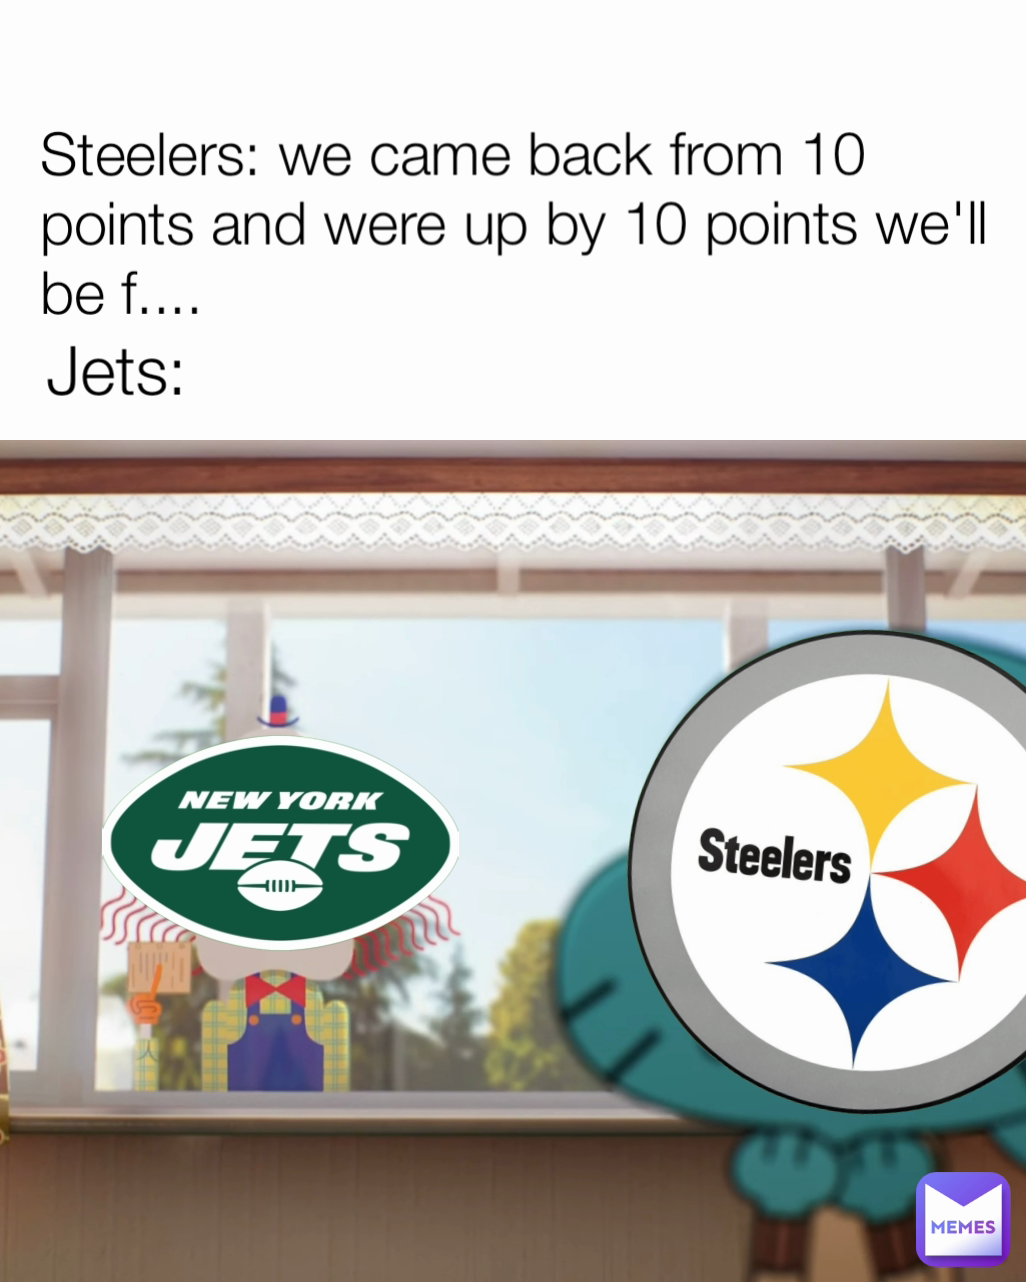 Steelers: we came back from 10 points and were up by 10 points we'll be f.... Jets: